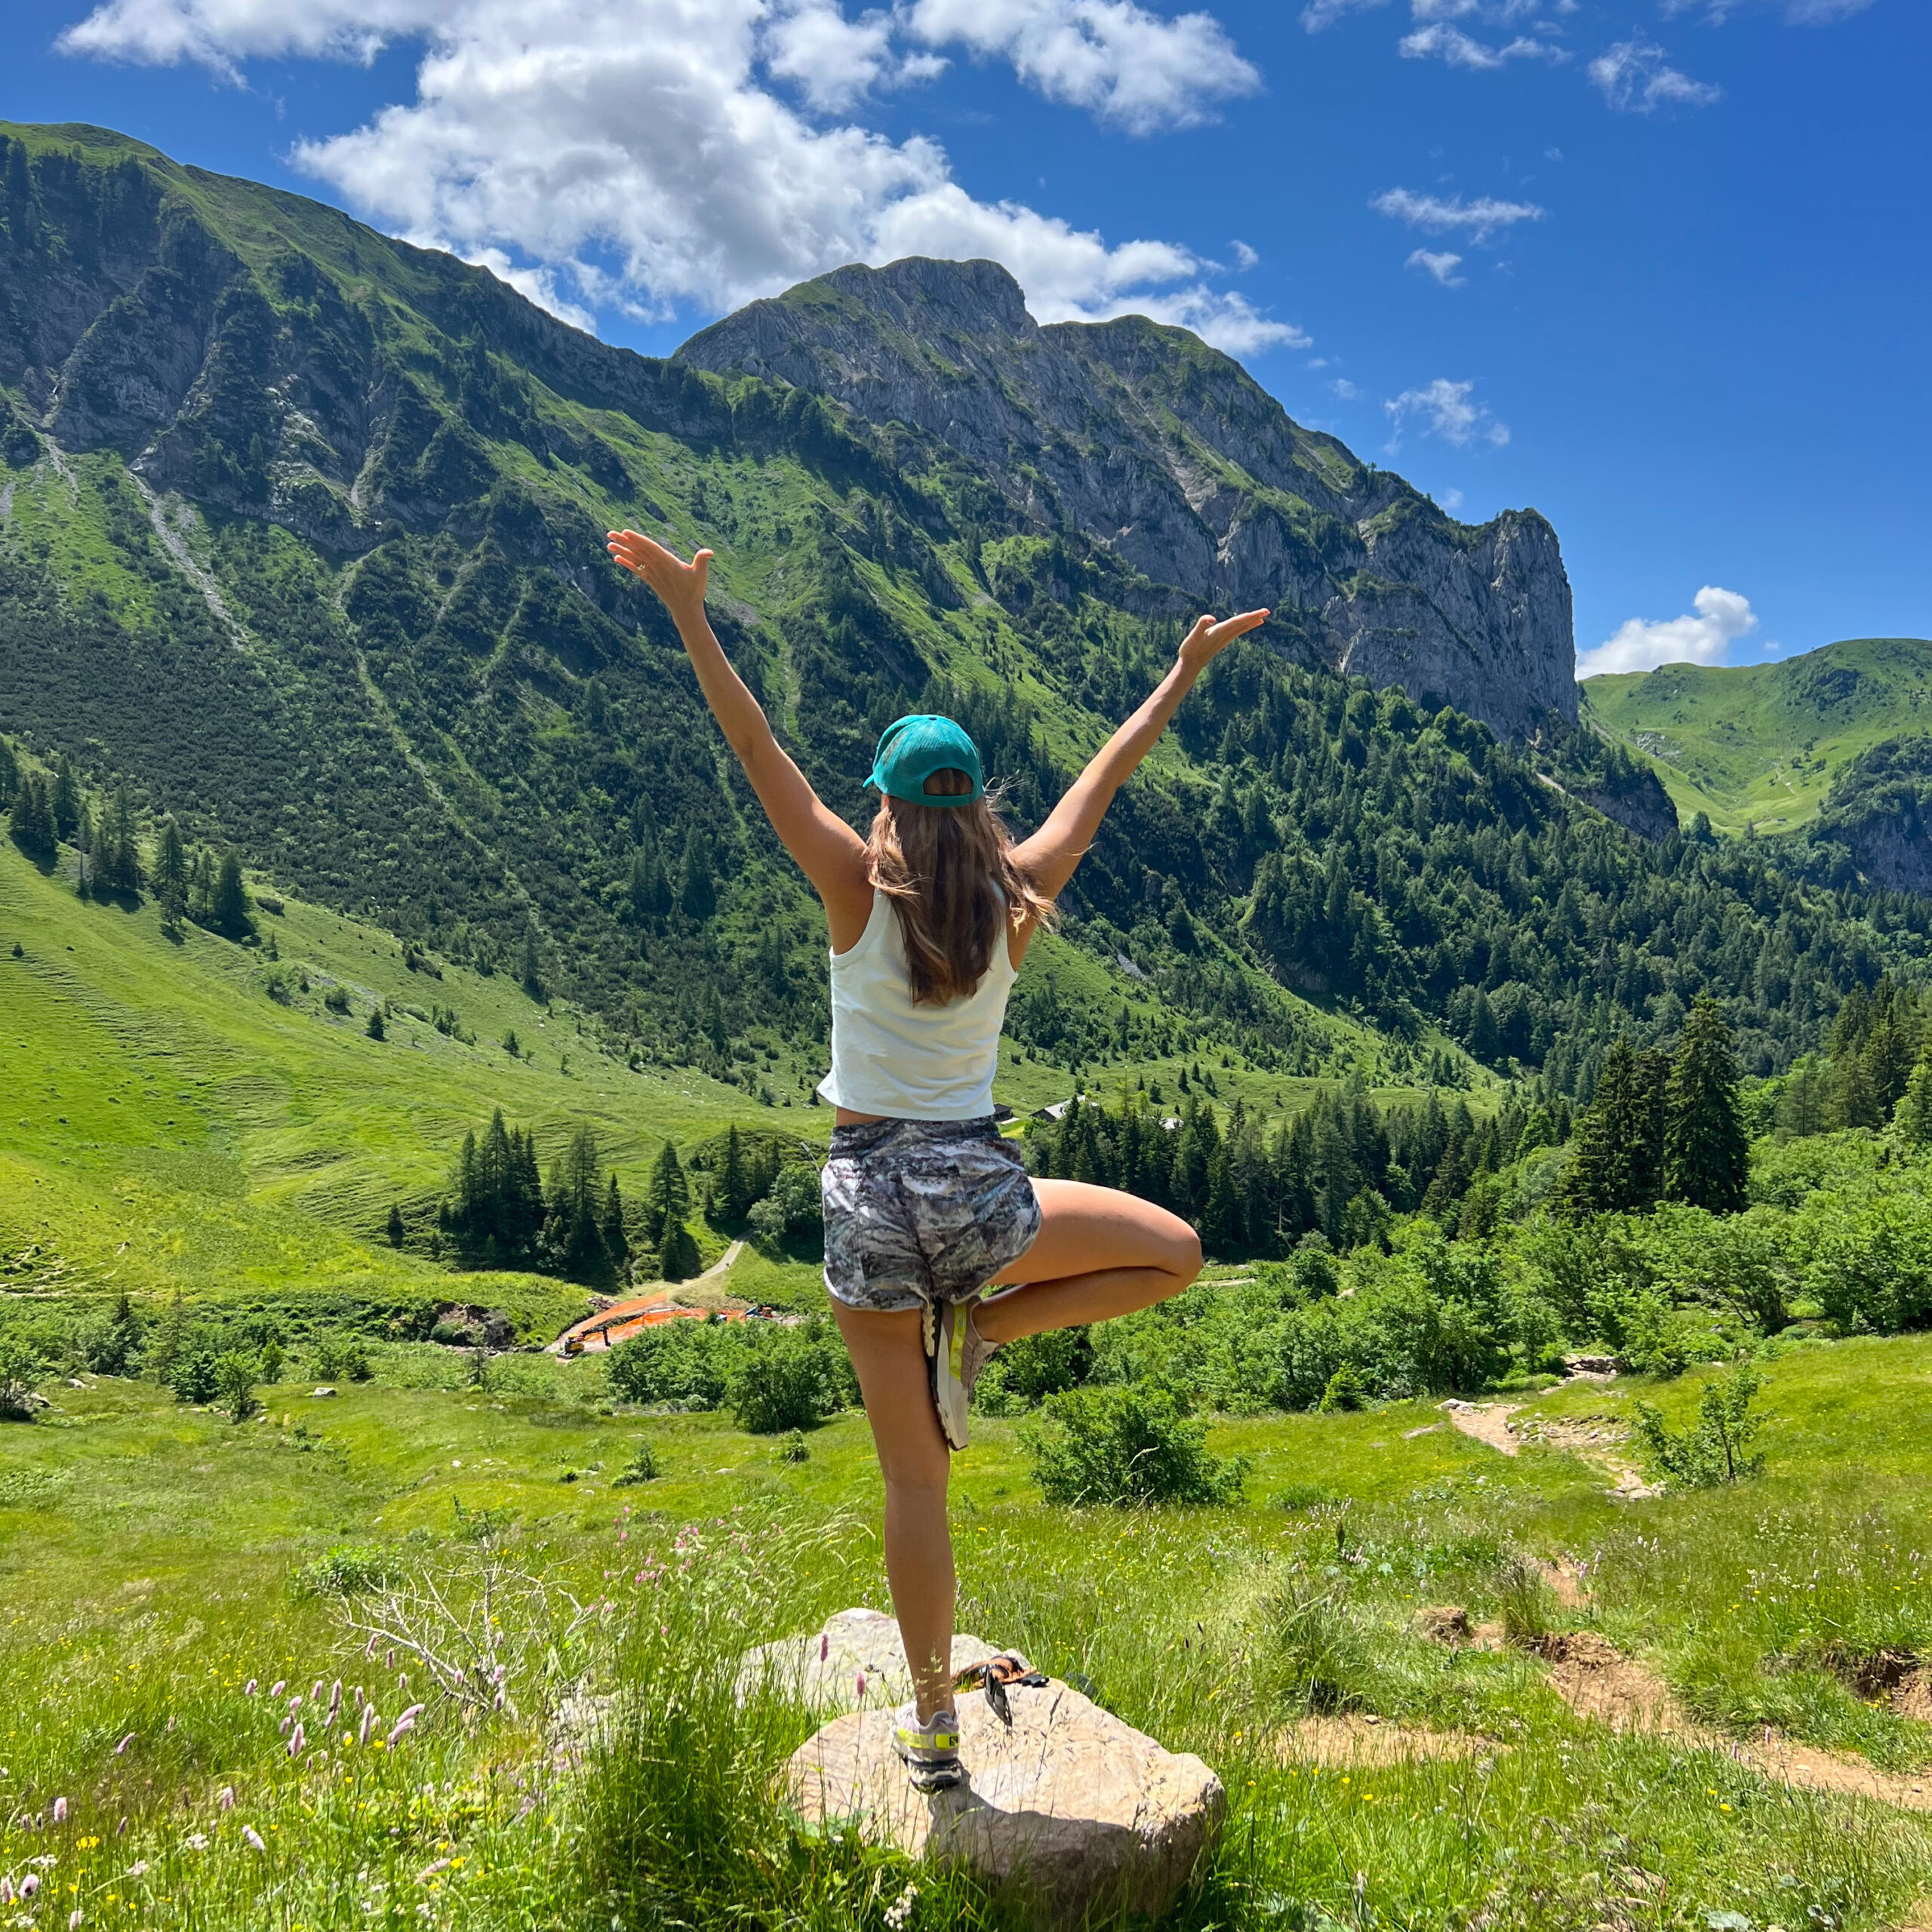 Yoga teacher in tree pose facing a mountain valley in Italy